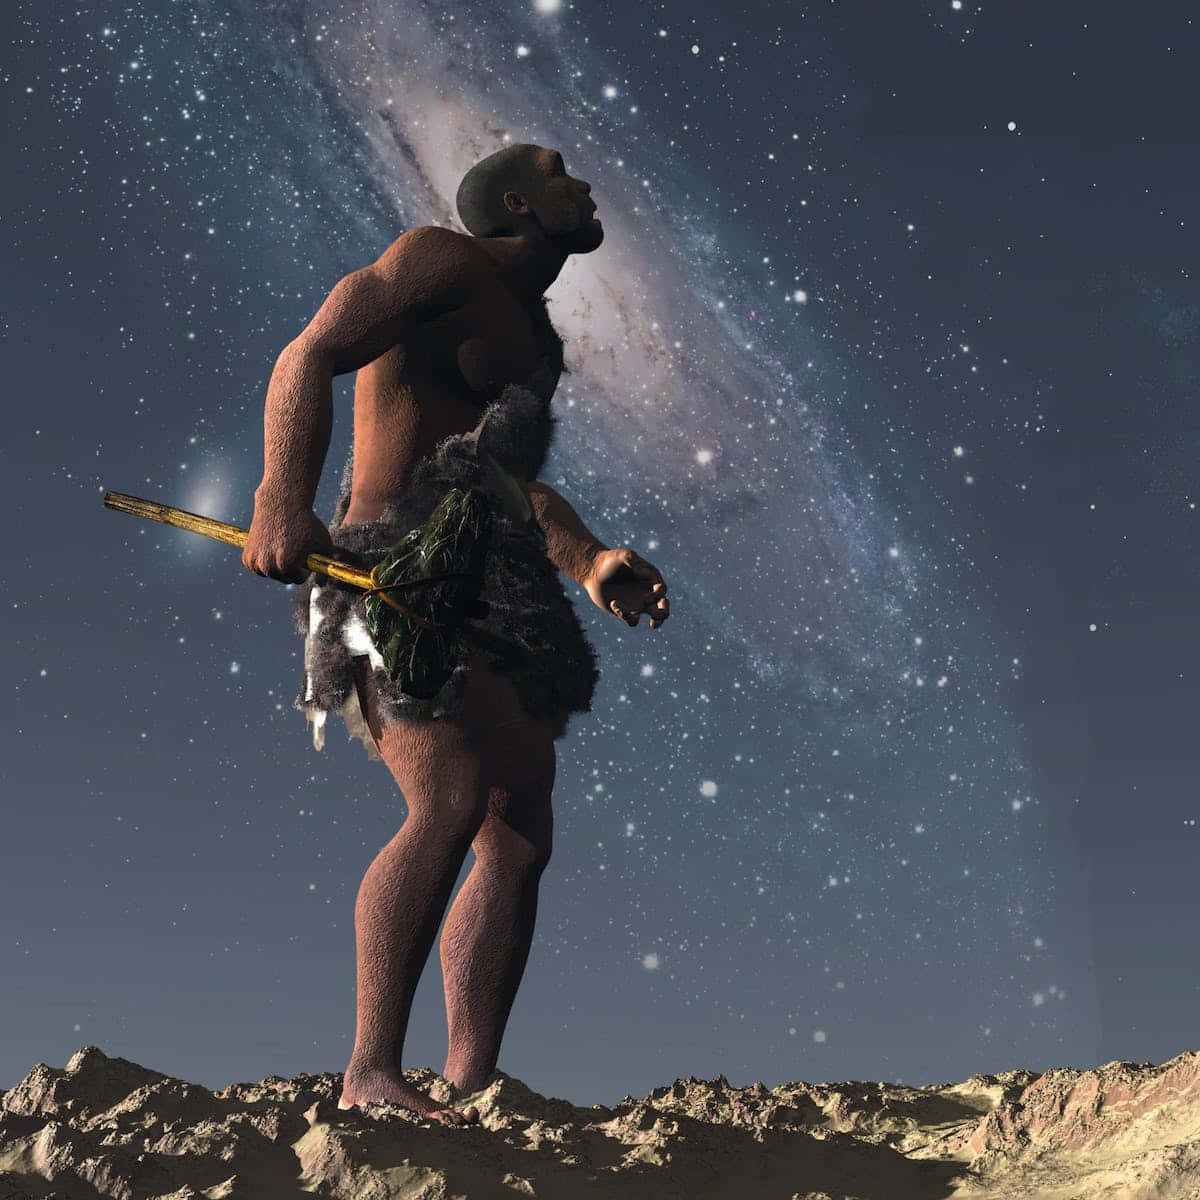 A Man Is Standing In The Desert With A Spear